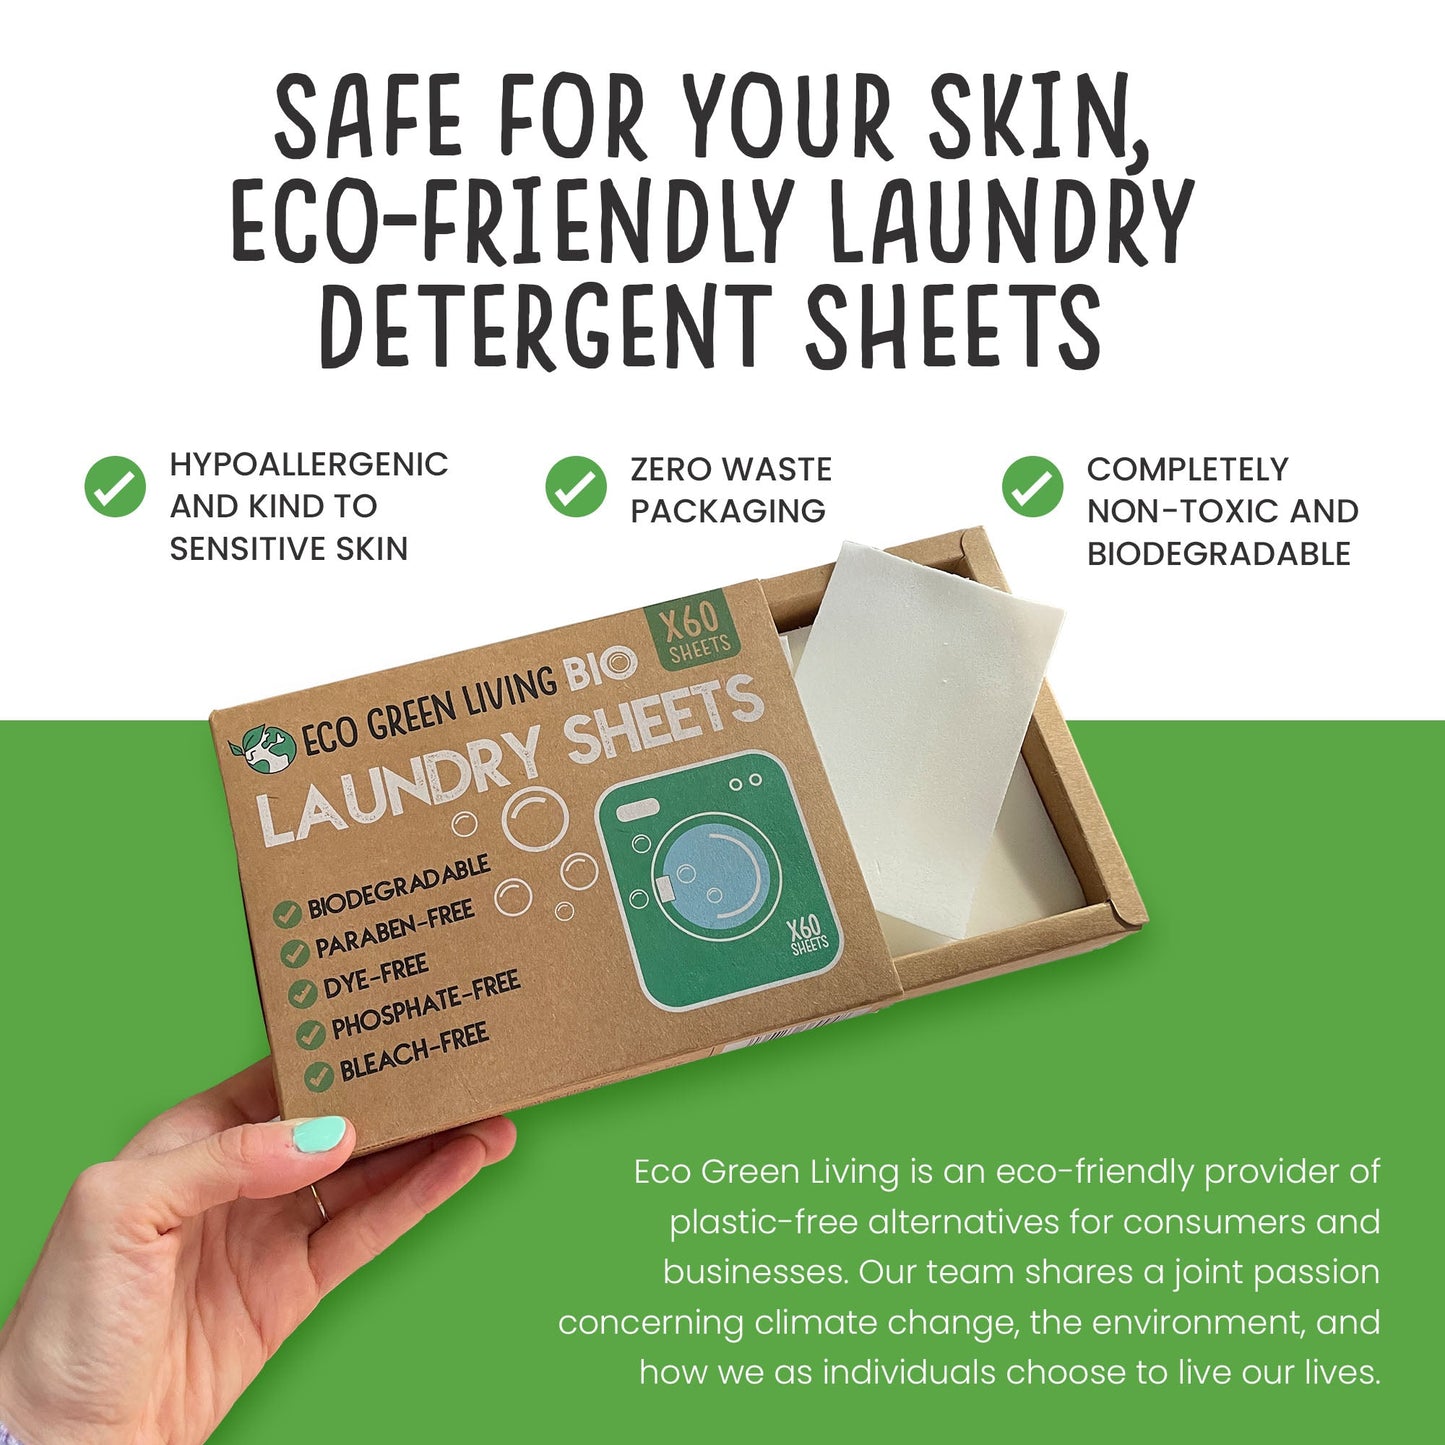 Biodegradable Hypoallergenic Laundry Sheets Bundle (6 packs) - Eco Green Living